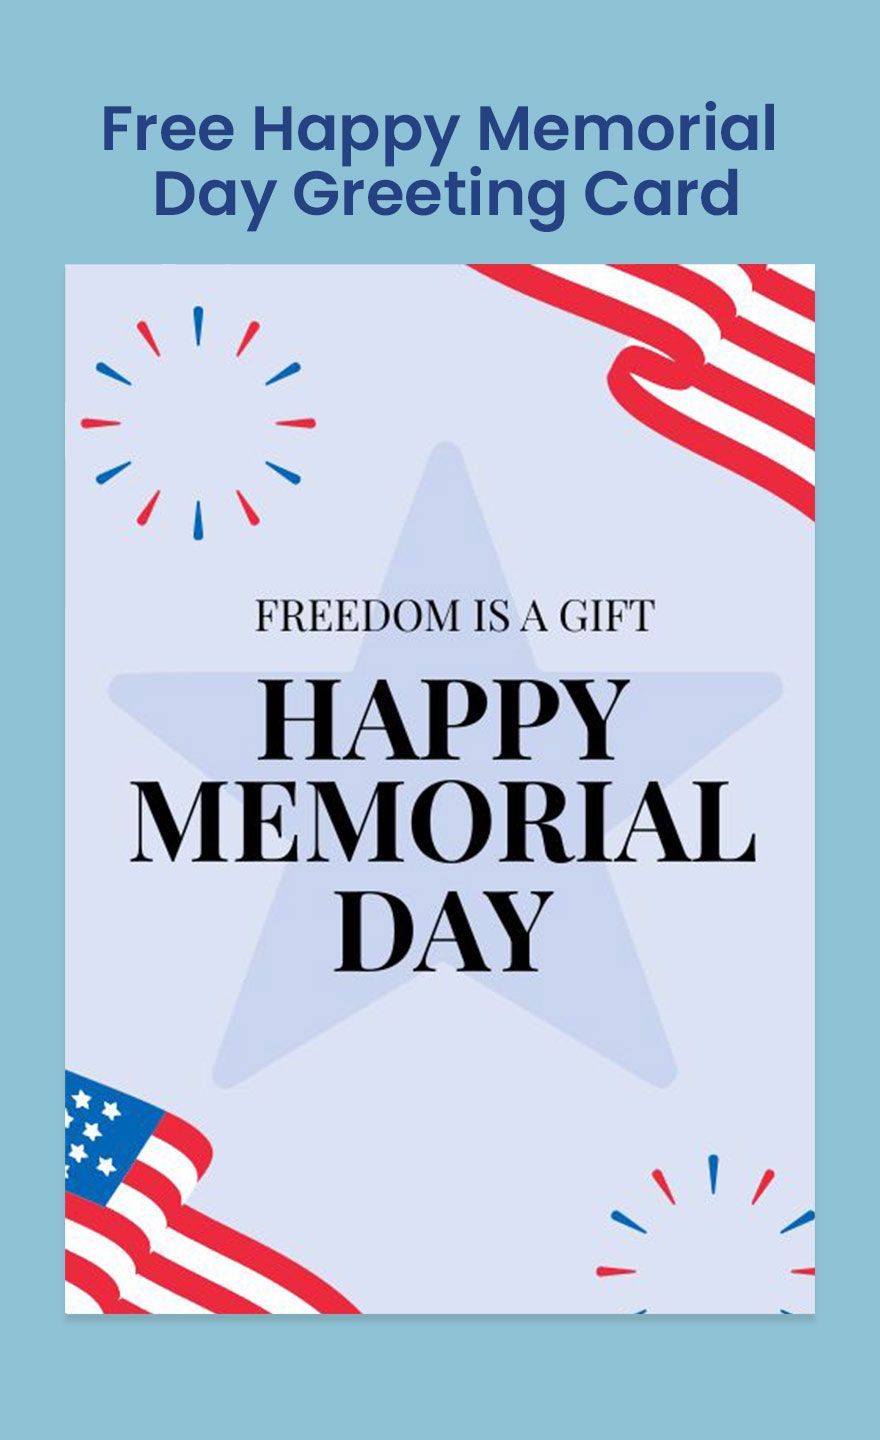 Free Happy Memorial Day Greeting Card in Word, Google Docs, Illustrator, PSD, EPS, SVG, PNG, JPEG